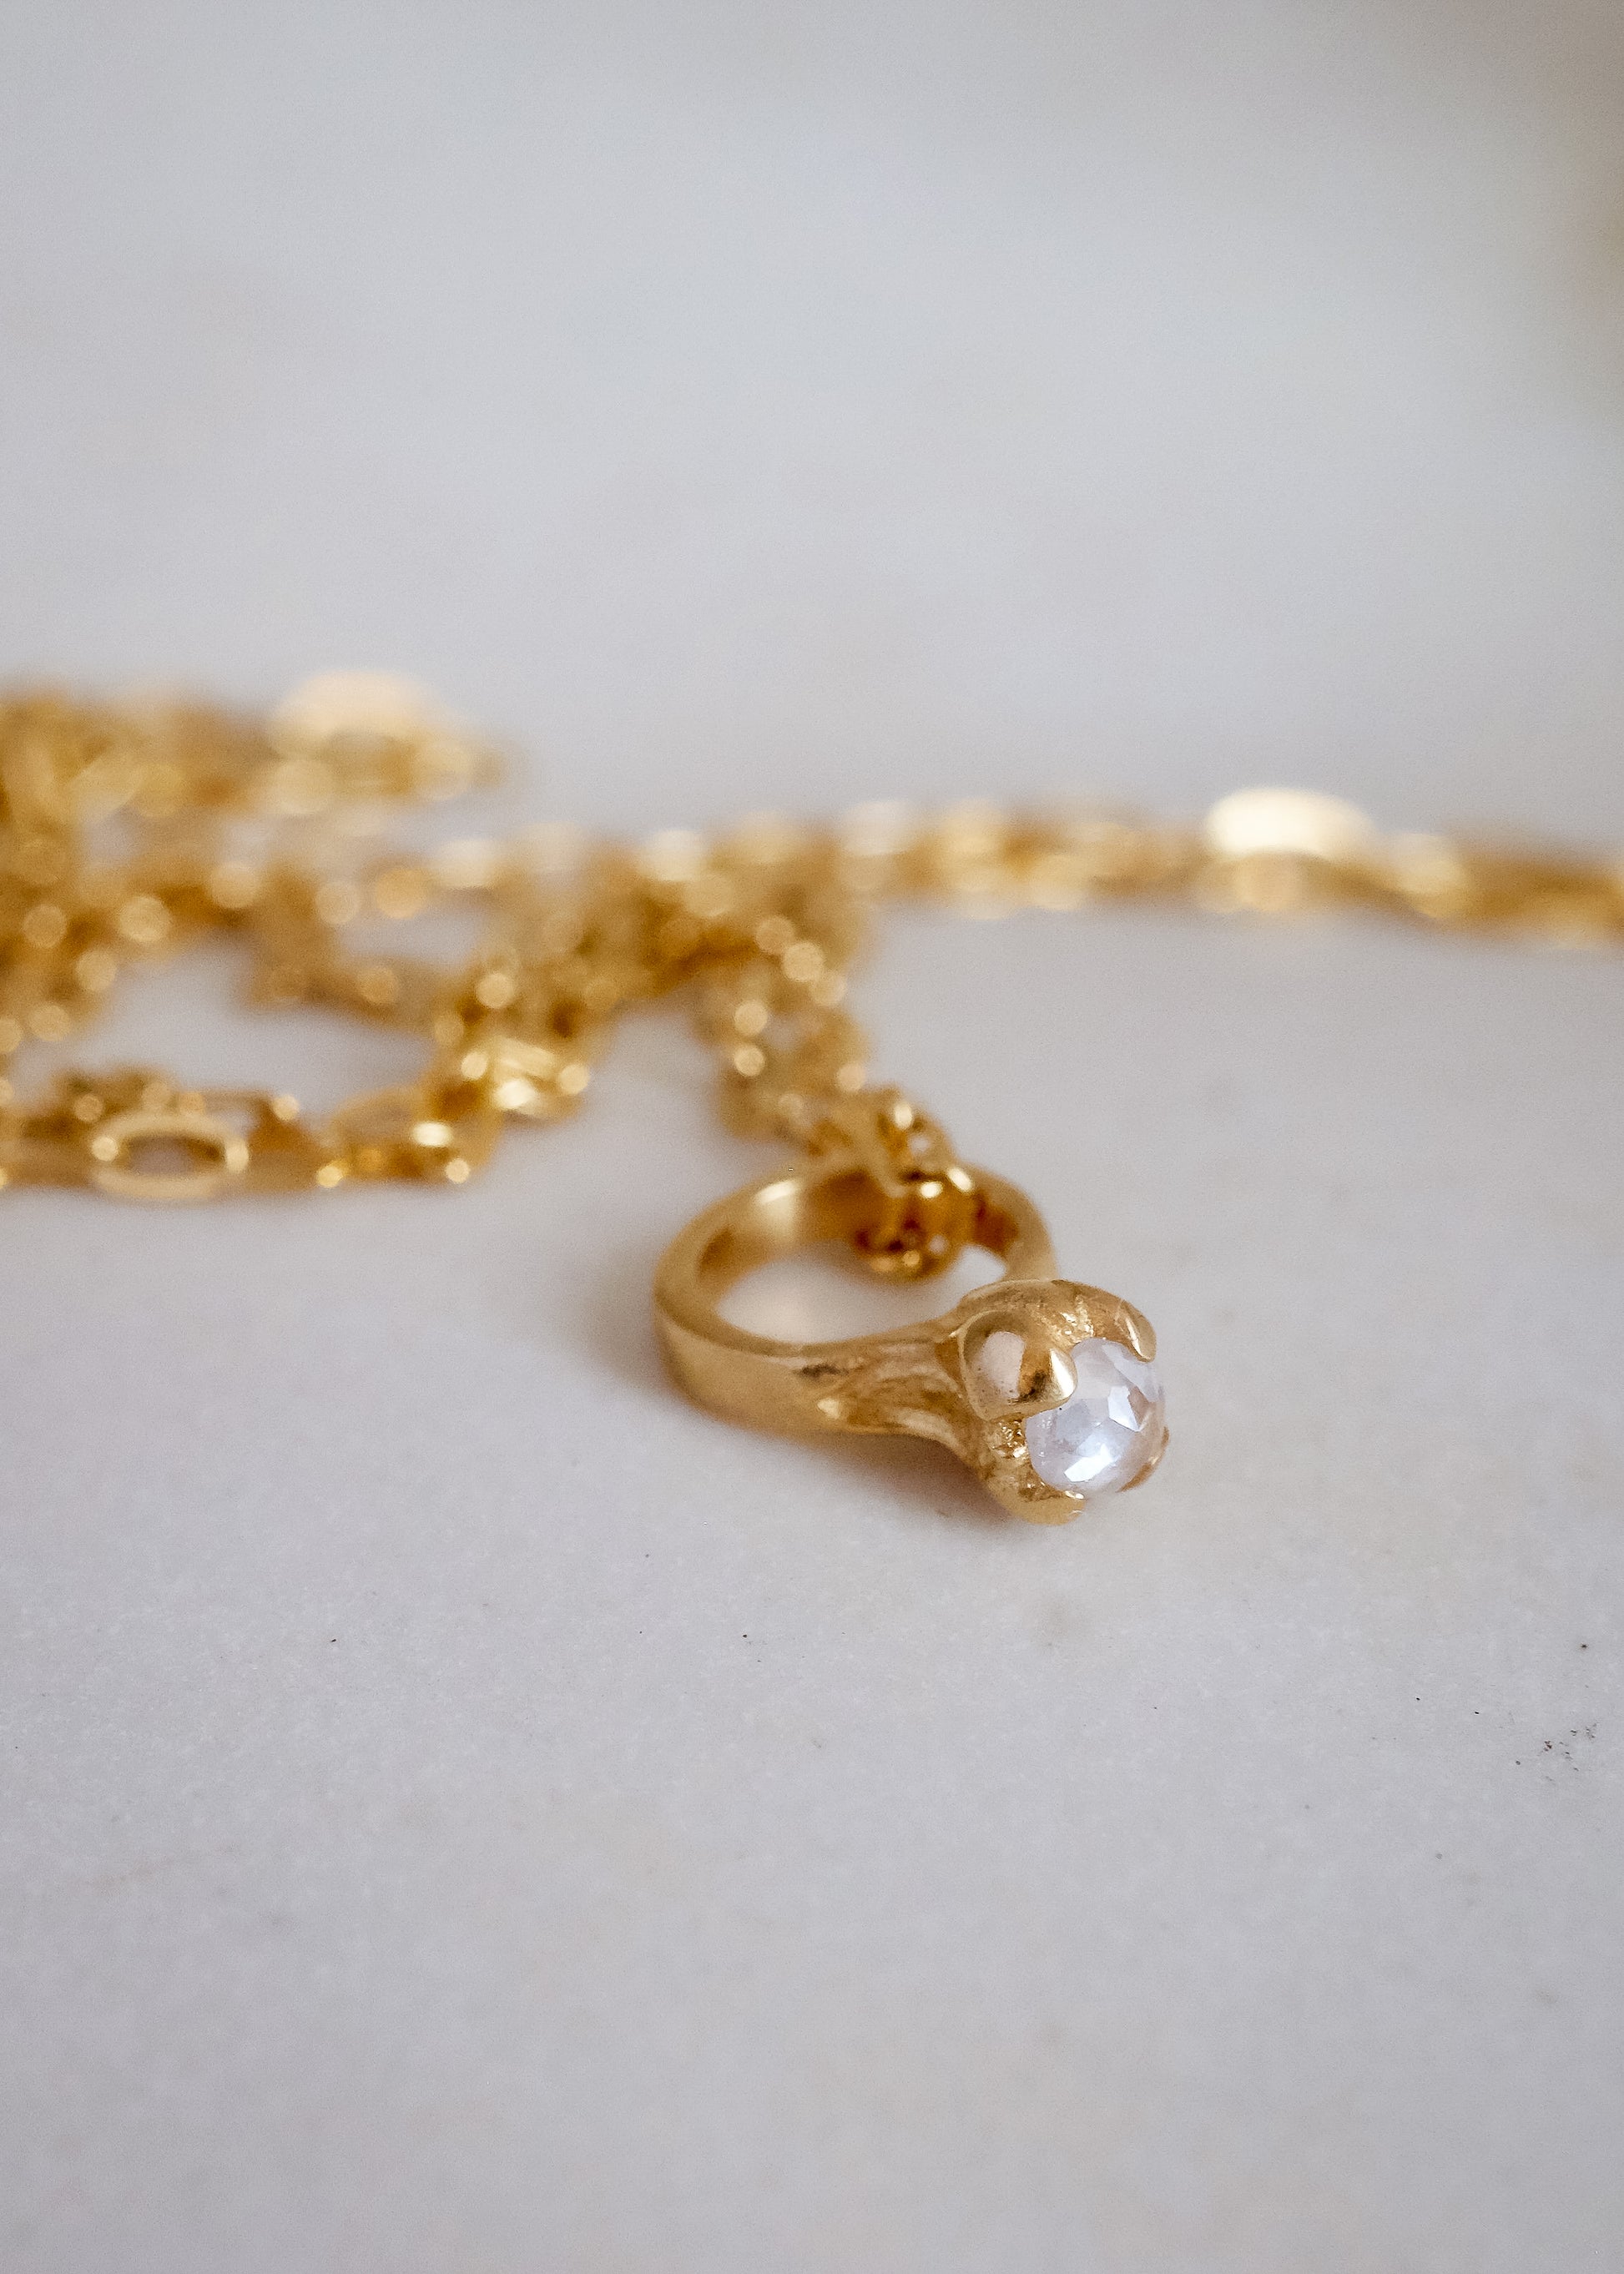 Inspired by a set of rings purchased for a childhood crush, the Bitty Diamond Ring necklace features a delicate gold ring-shaped pendant, hand-crafted with intricate detail to reveal a stunning diamond crown. Perfect for celebrating new motherhood, sisterhood, friendship or love in bloom, the Bitty captures the magic of innocent childhood days, infused now with refined sophistication. 